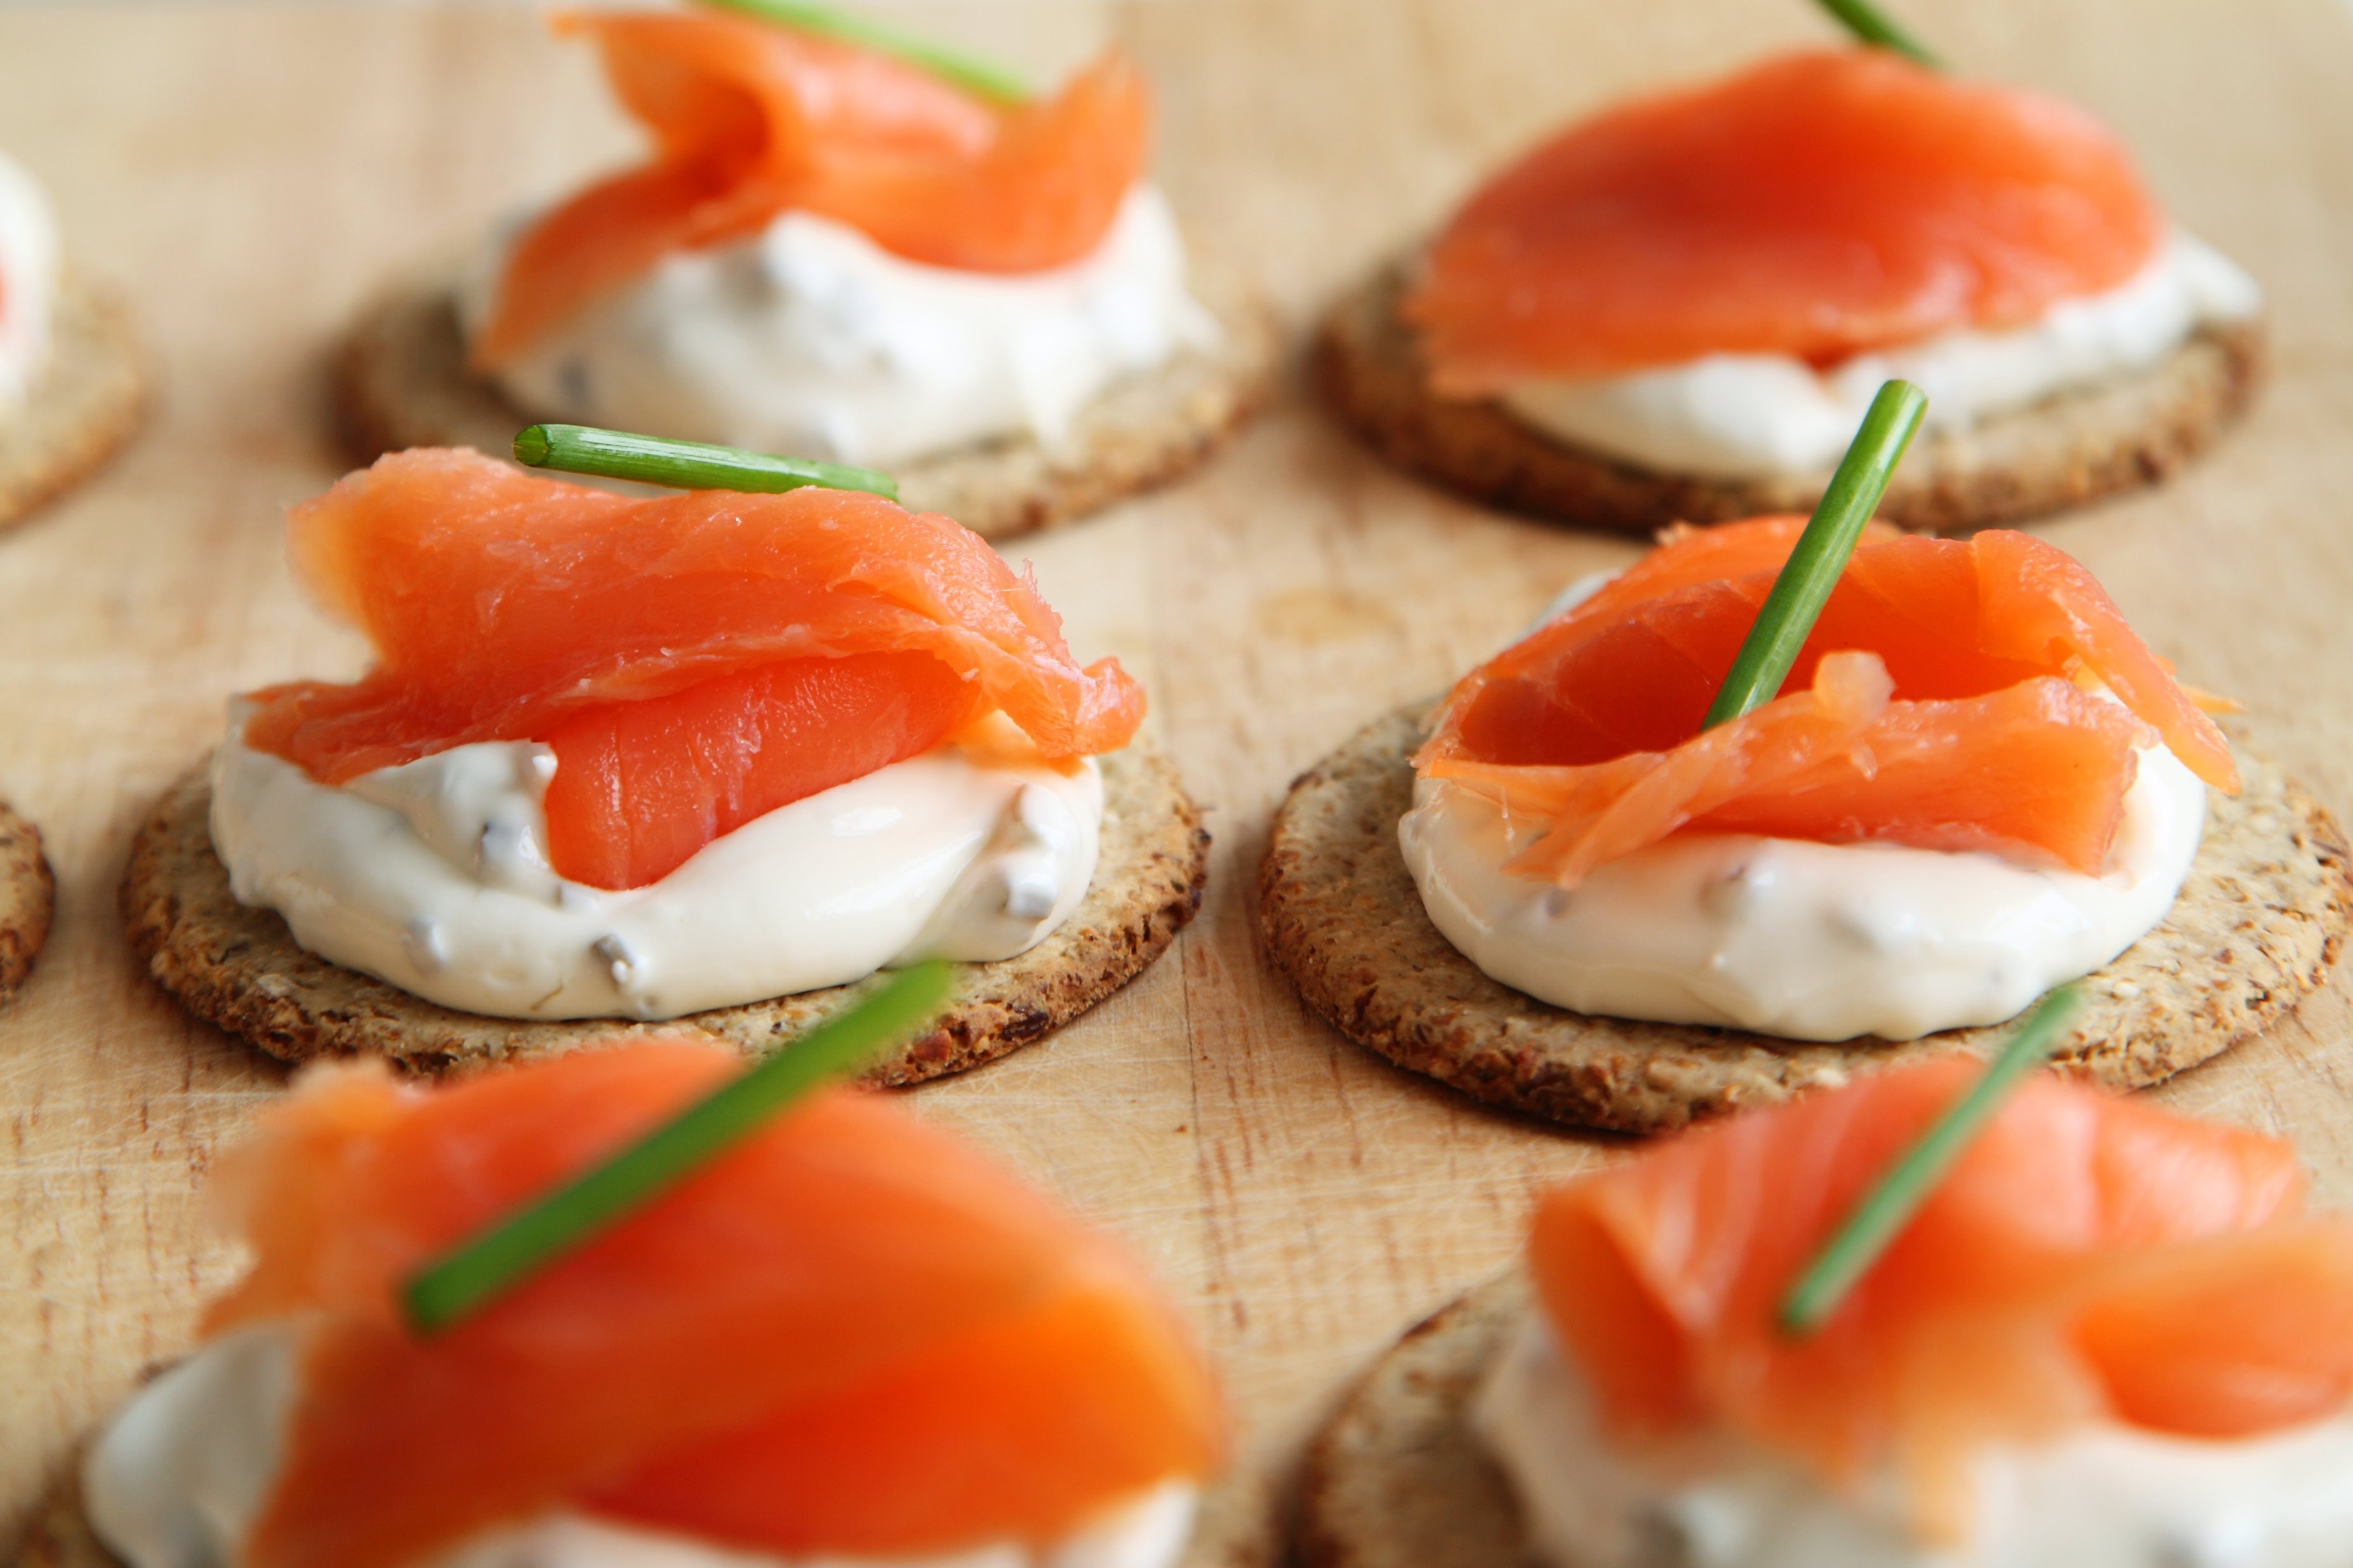 2560x1440 wallpaper | Cheese, Canapes, Appetizer, Canape, food and ...